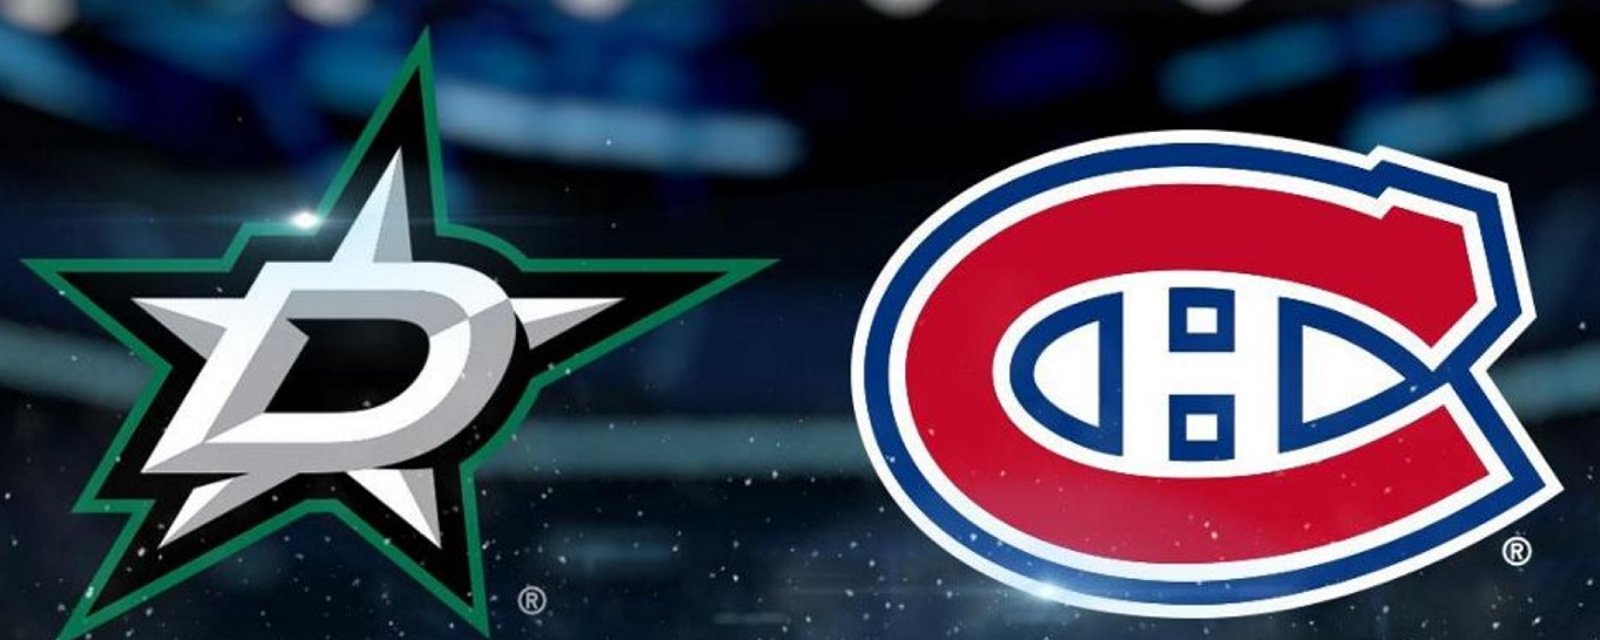 Rumor: Dallas Stars attempting to trade for 2 players on the Canadiens roster.